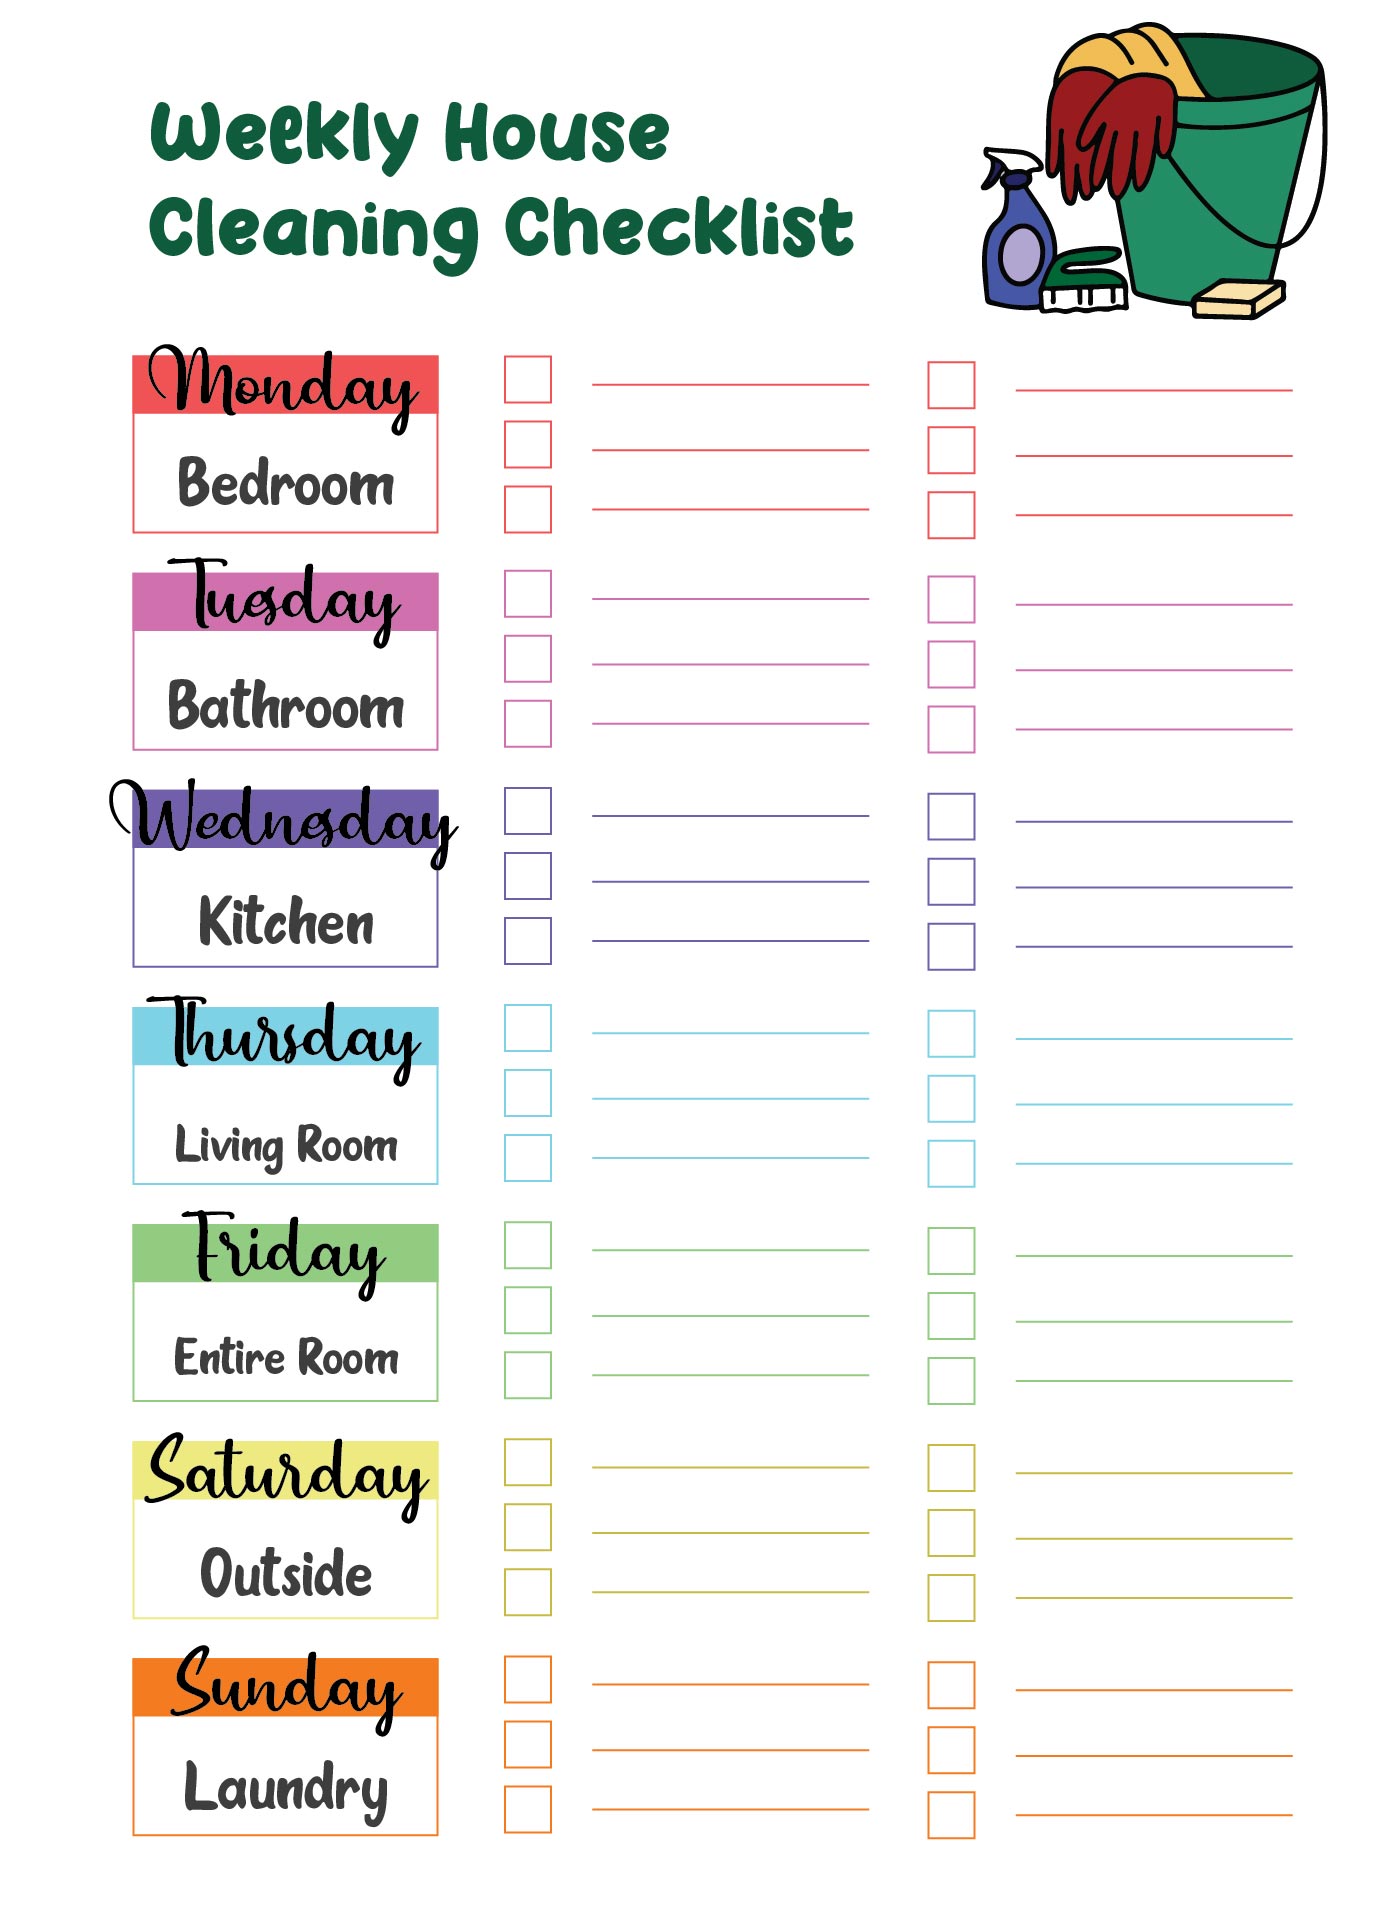 a-basic-cleaning-schedule-checklist-printable